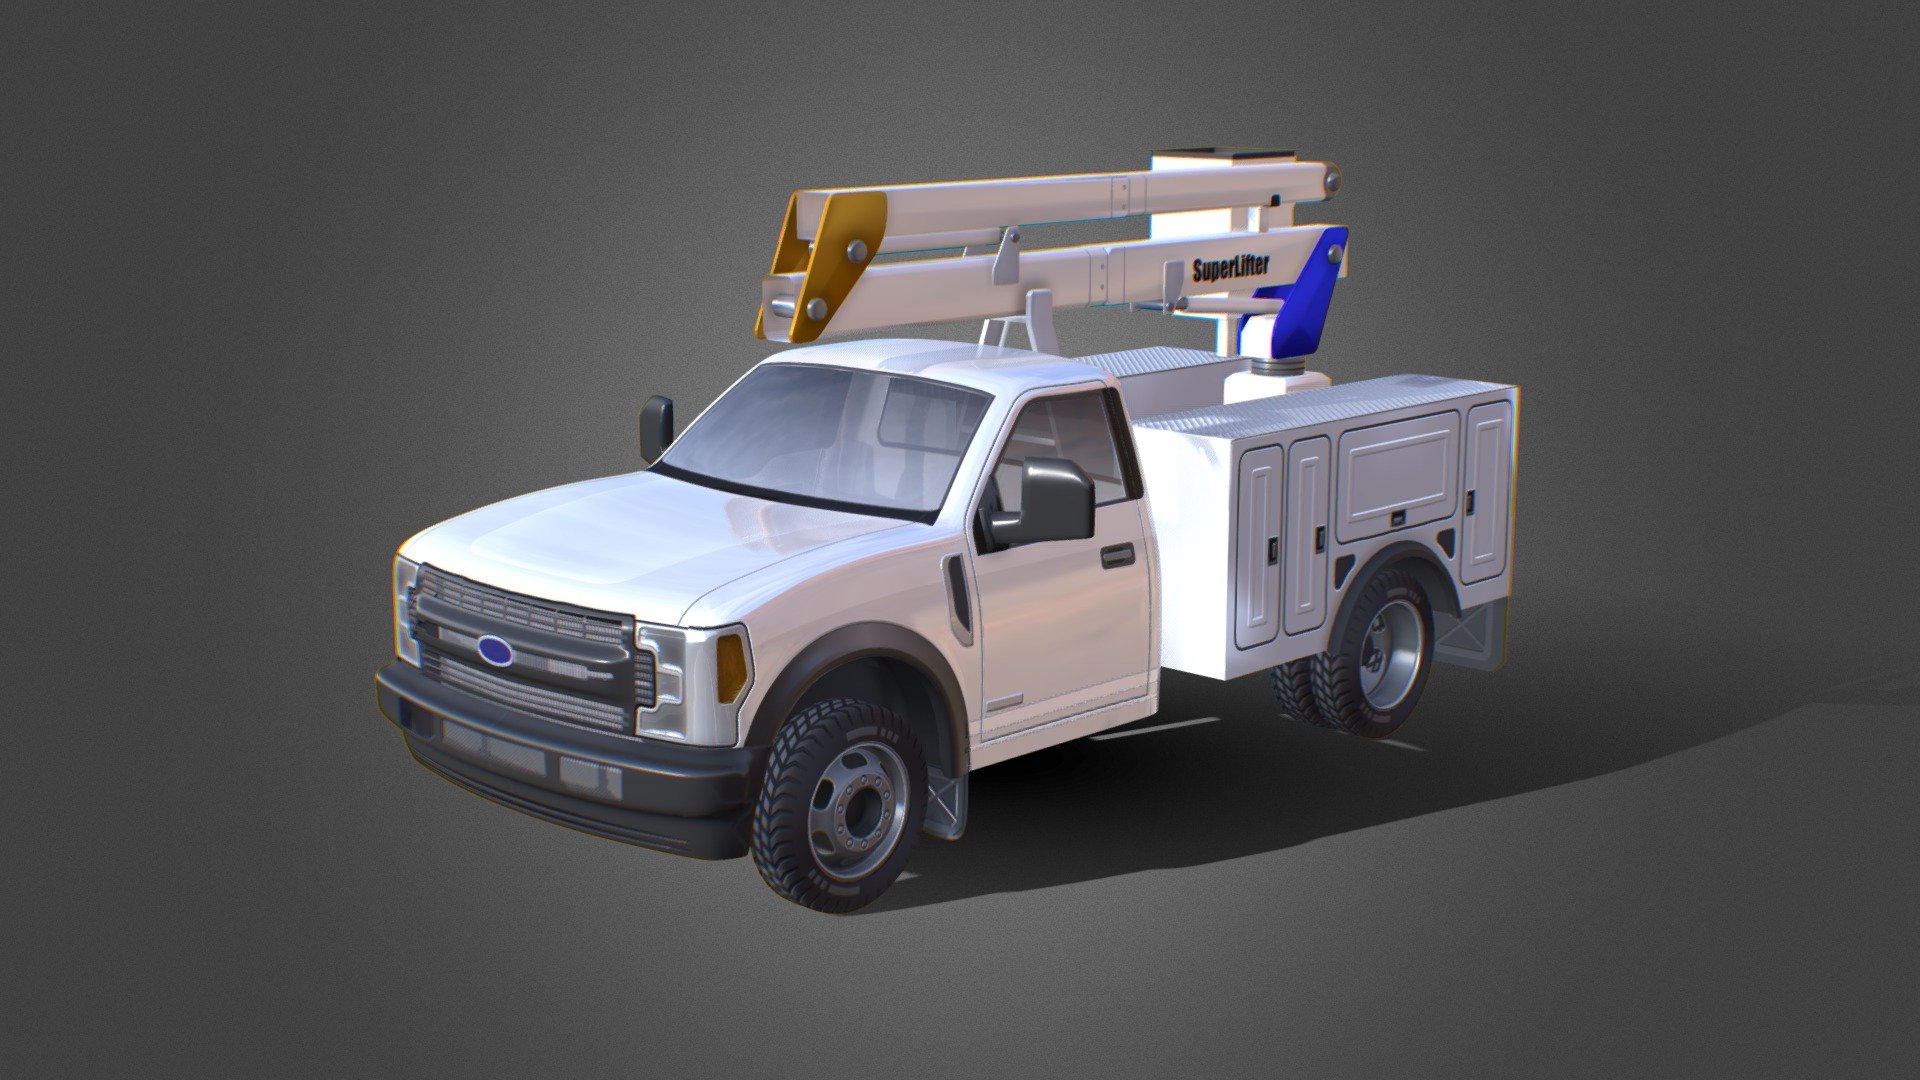 Ford F350 Superduty Basket Crane Truck utility truck for industrial / electrical work. Modelled in Blender, textured in Illustrator. 3 PBR materials for cabin, box and crane, each one with its color, roughness, metalness, bump and opacity channel. PNG texture images for every channel. FBX file included in download 3d model